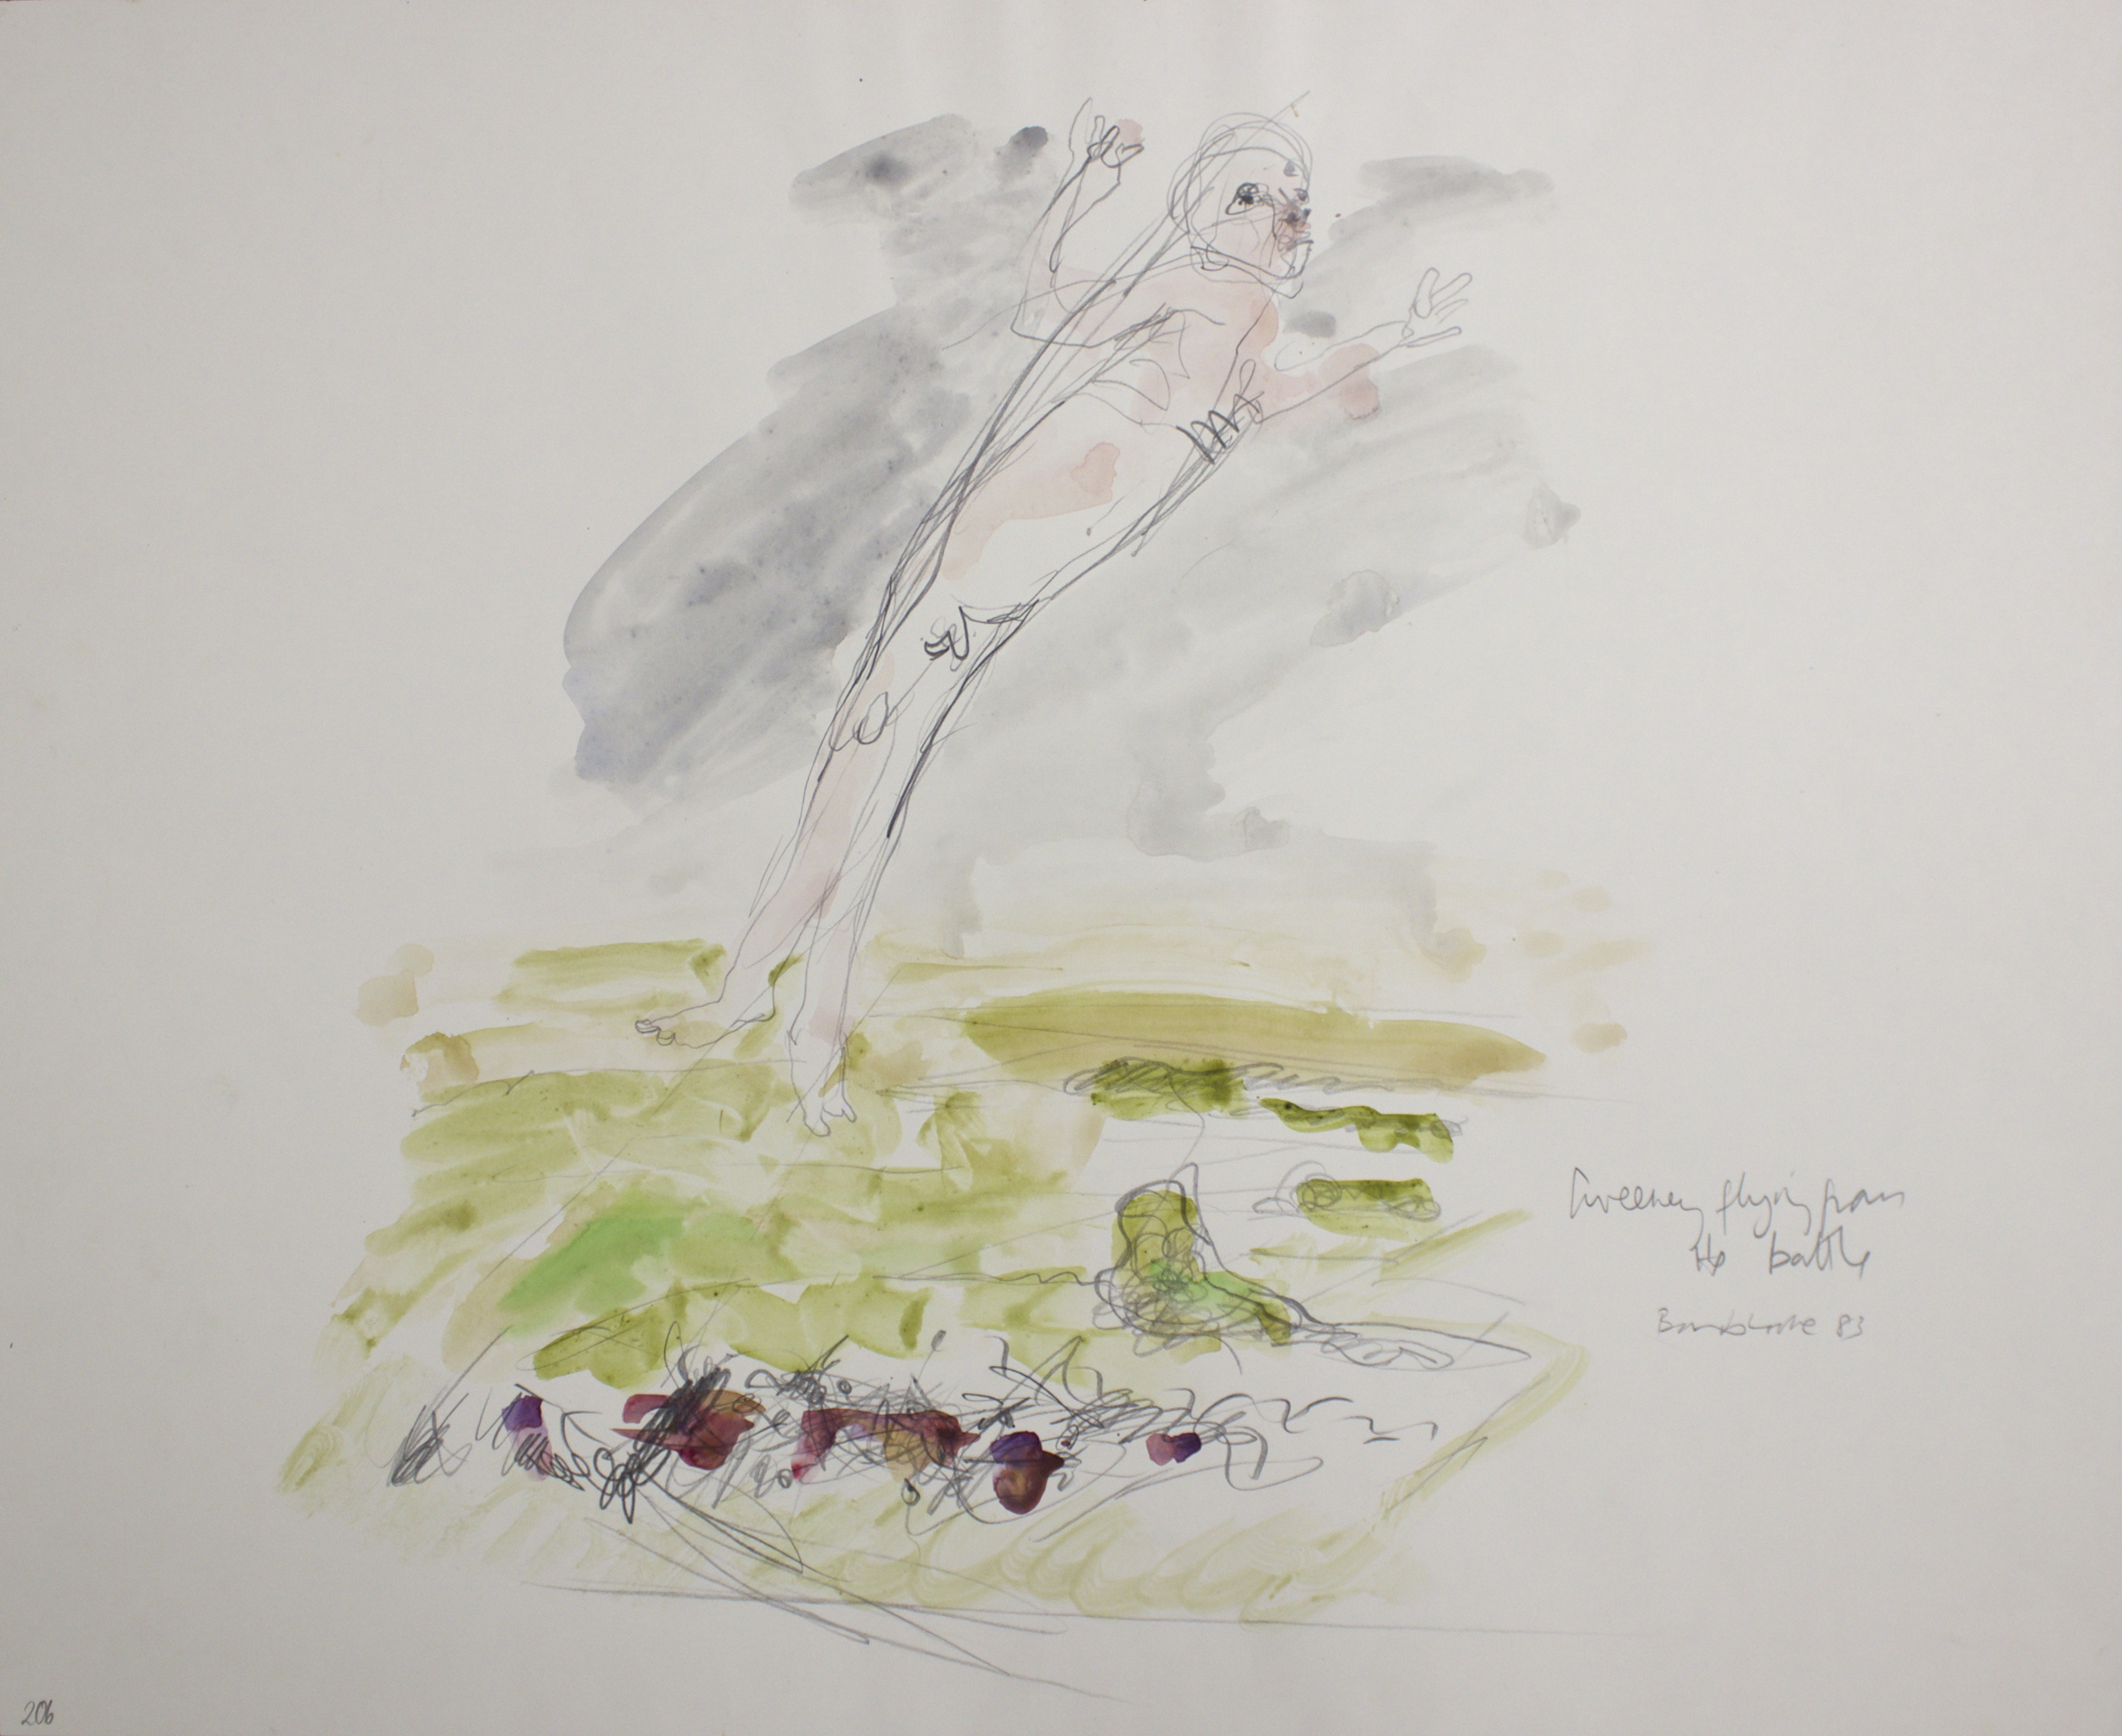 Barrie Cooke, ‘Sweeney flying from the battle’ (Watercolour and pencil, 1983) for Seamus Heaney’s Sweeney Astray (1984). Credit: The Estate of Barrie Cooke. Photograph by the Cambridge Colleges Conservation Consortium.